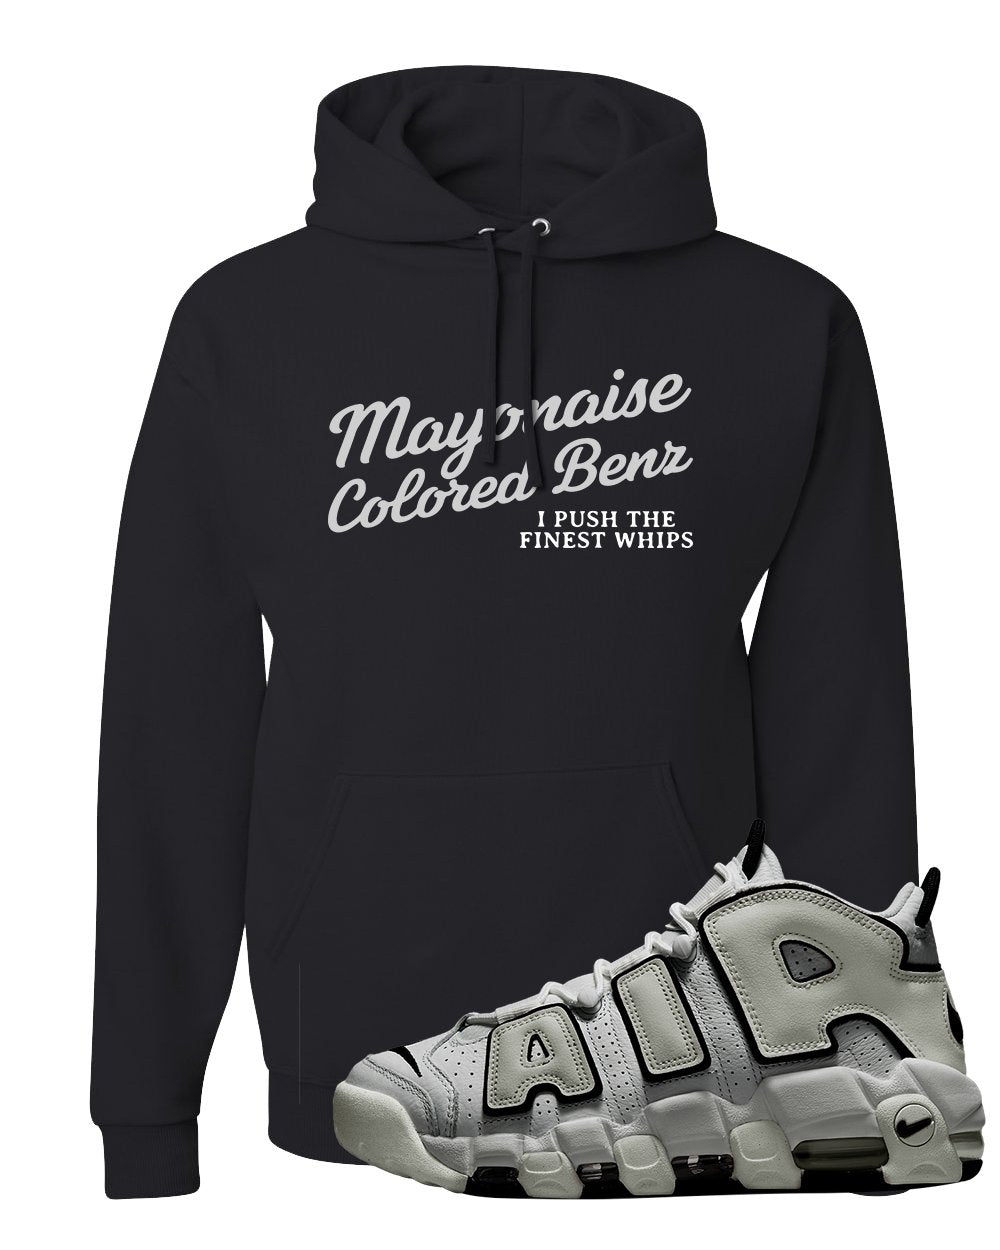 White Black Uptempos Hoodie | Mayonaise Colored Benz, Black